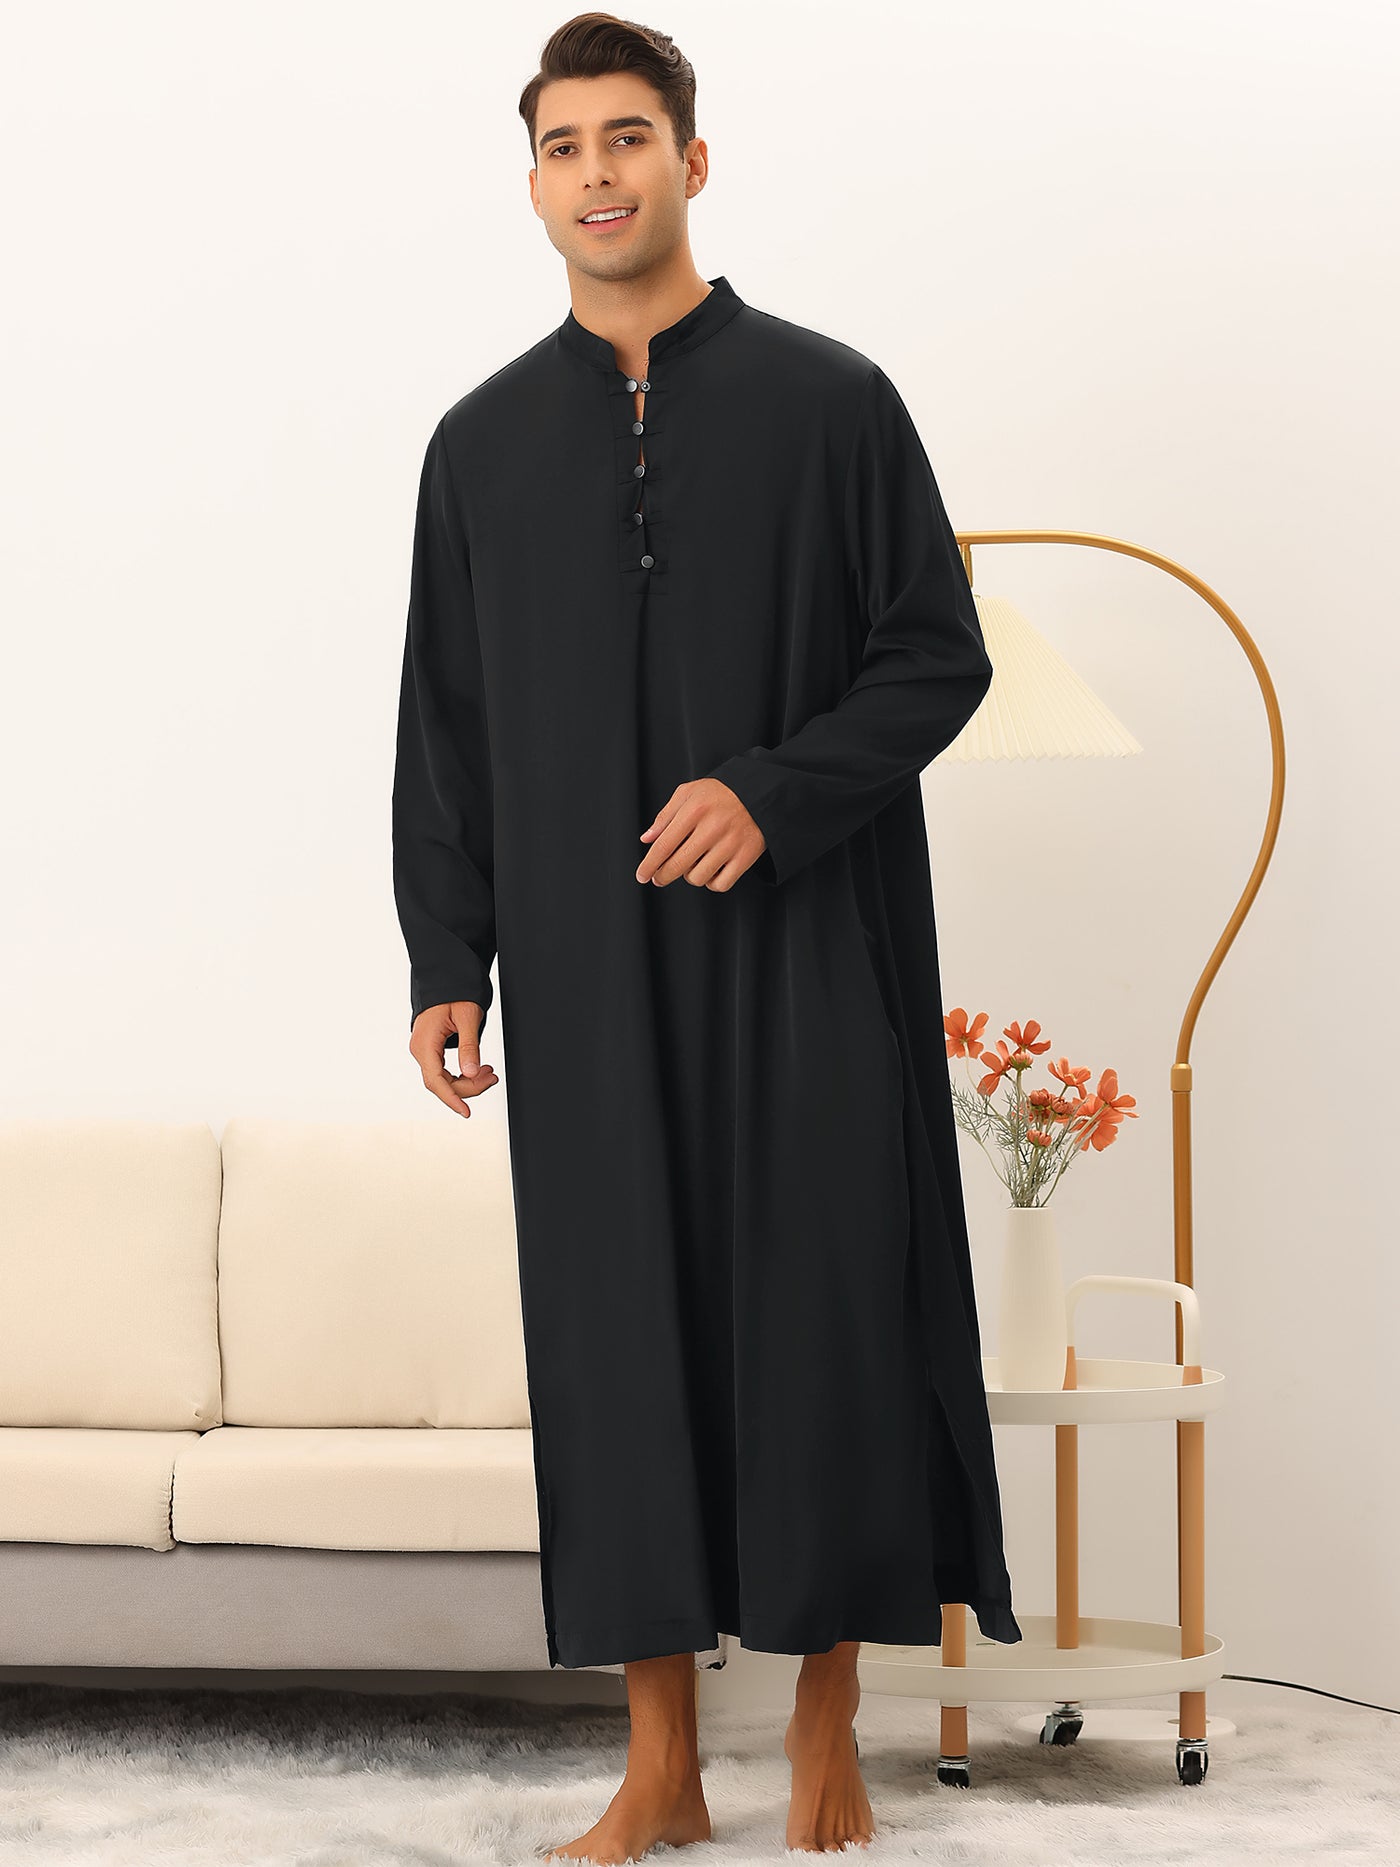 Bublédon Men's Nightshirt Button Up Stand Collar Solid Color Casual Long Gown